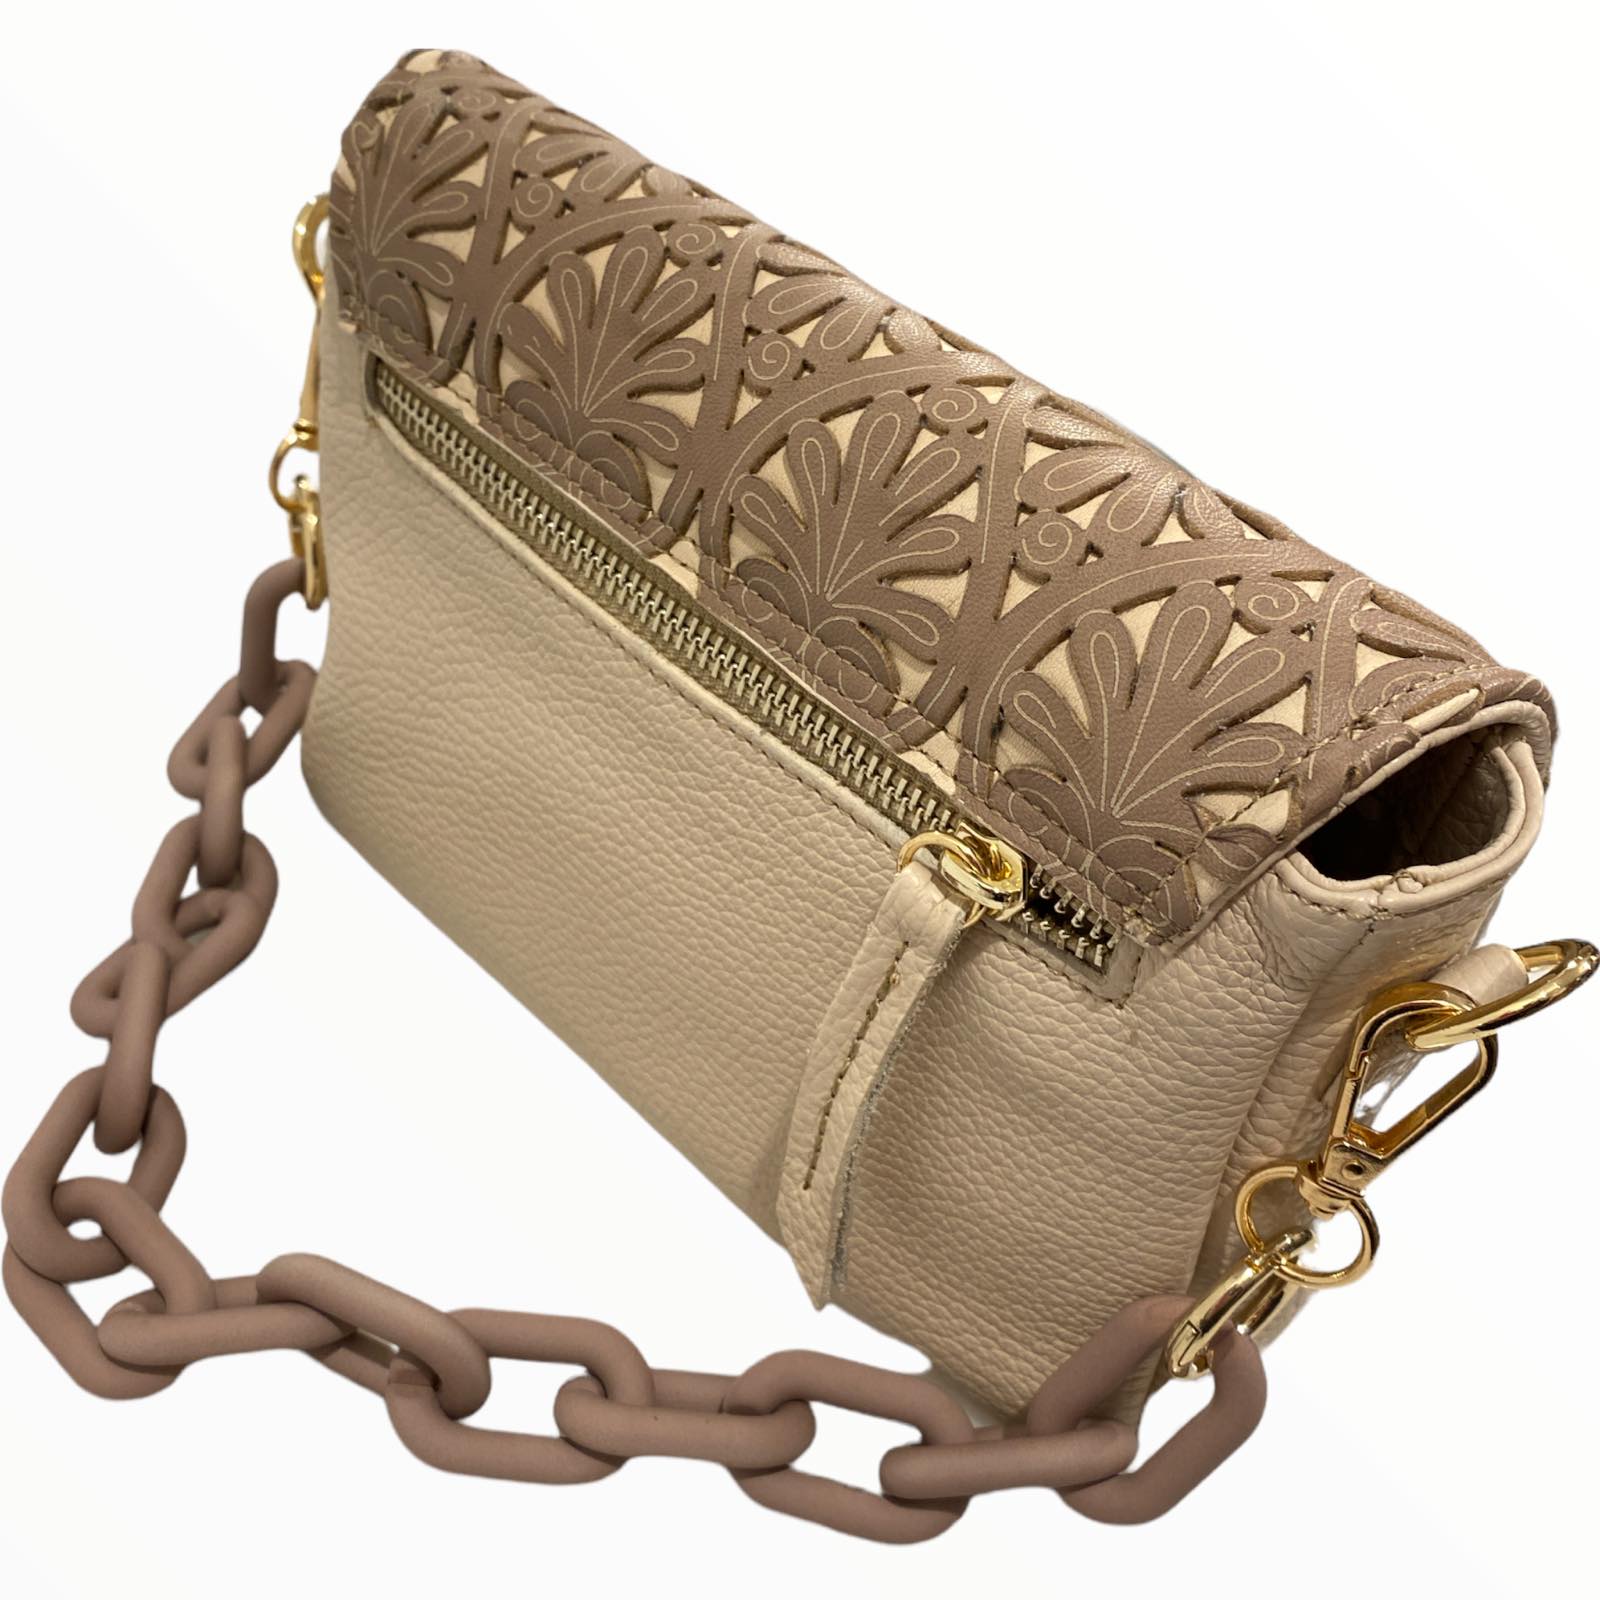 Beige chic leather evening bag